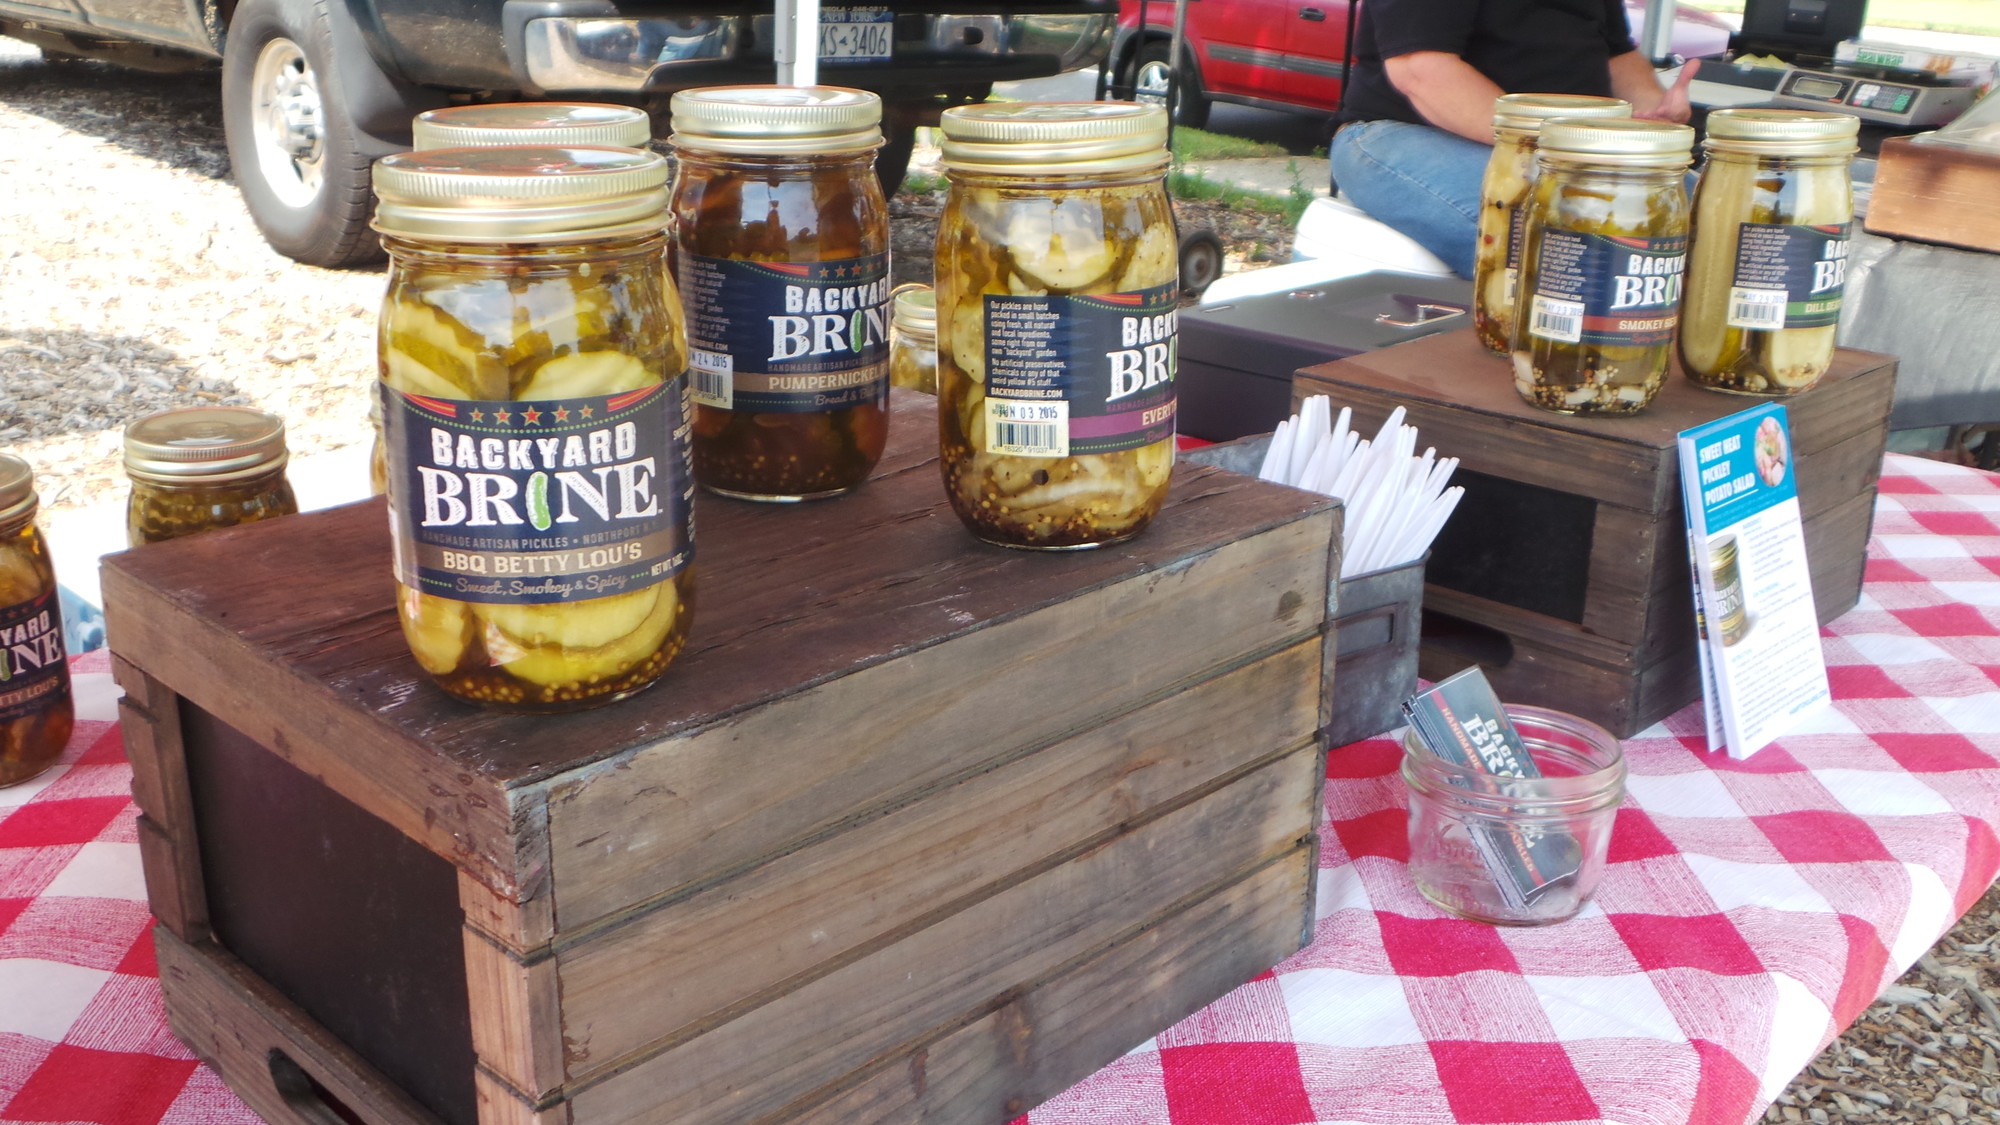 Backyard Brine uses Long Island produce to make pickles from their 16 original recipes